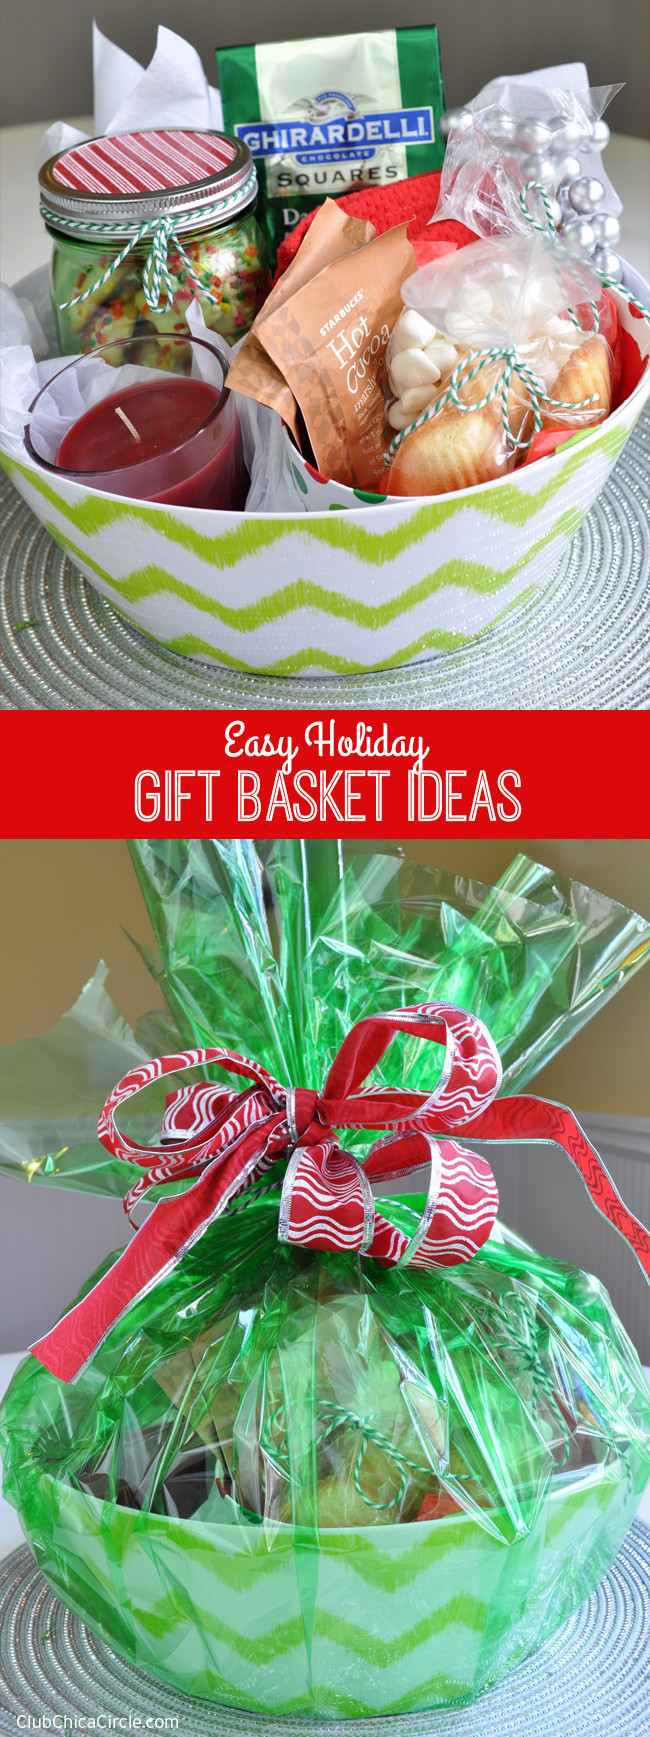 Easy Gift Basket Ideas
 Easy Holiday Gift Basket Ideas Giveaway